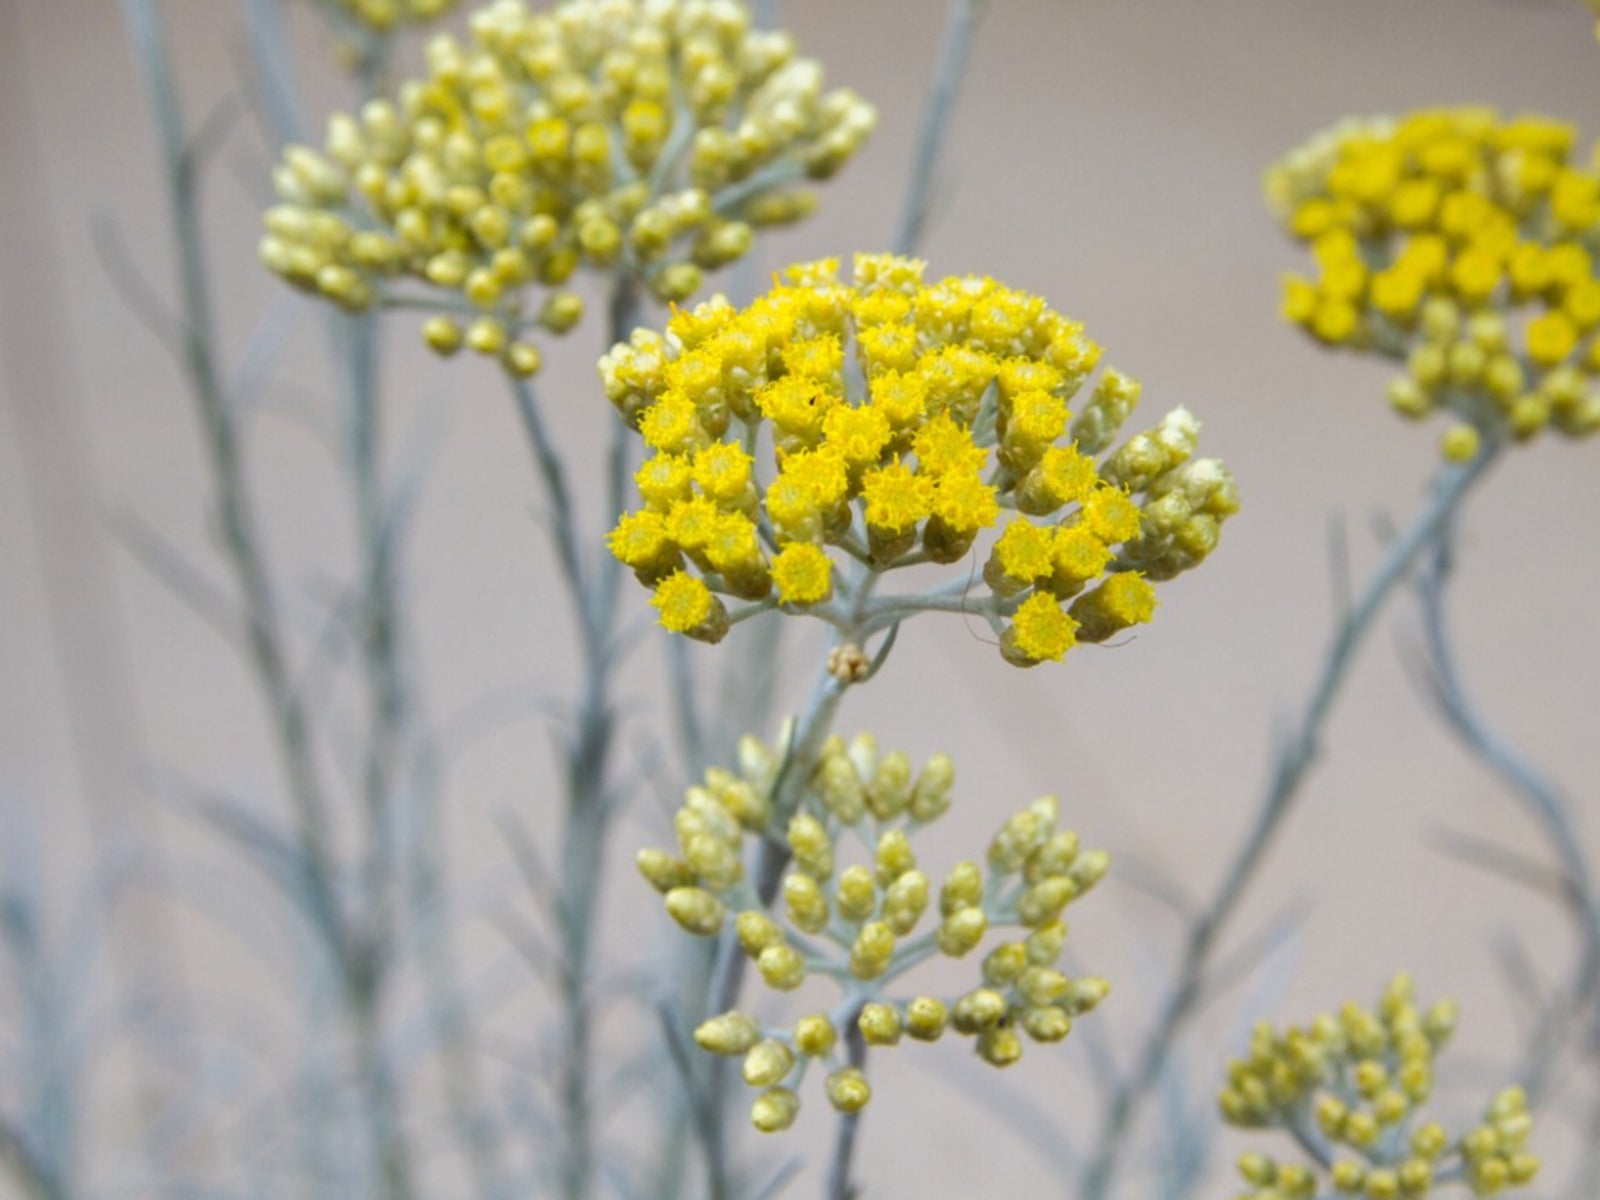 helichrysum curry care - learn about growing an ornamental curry plant